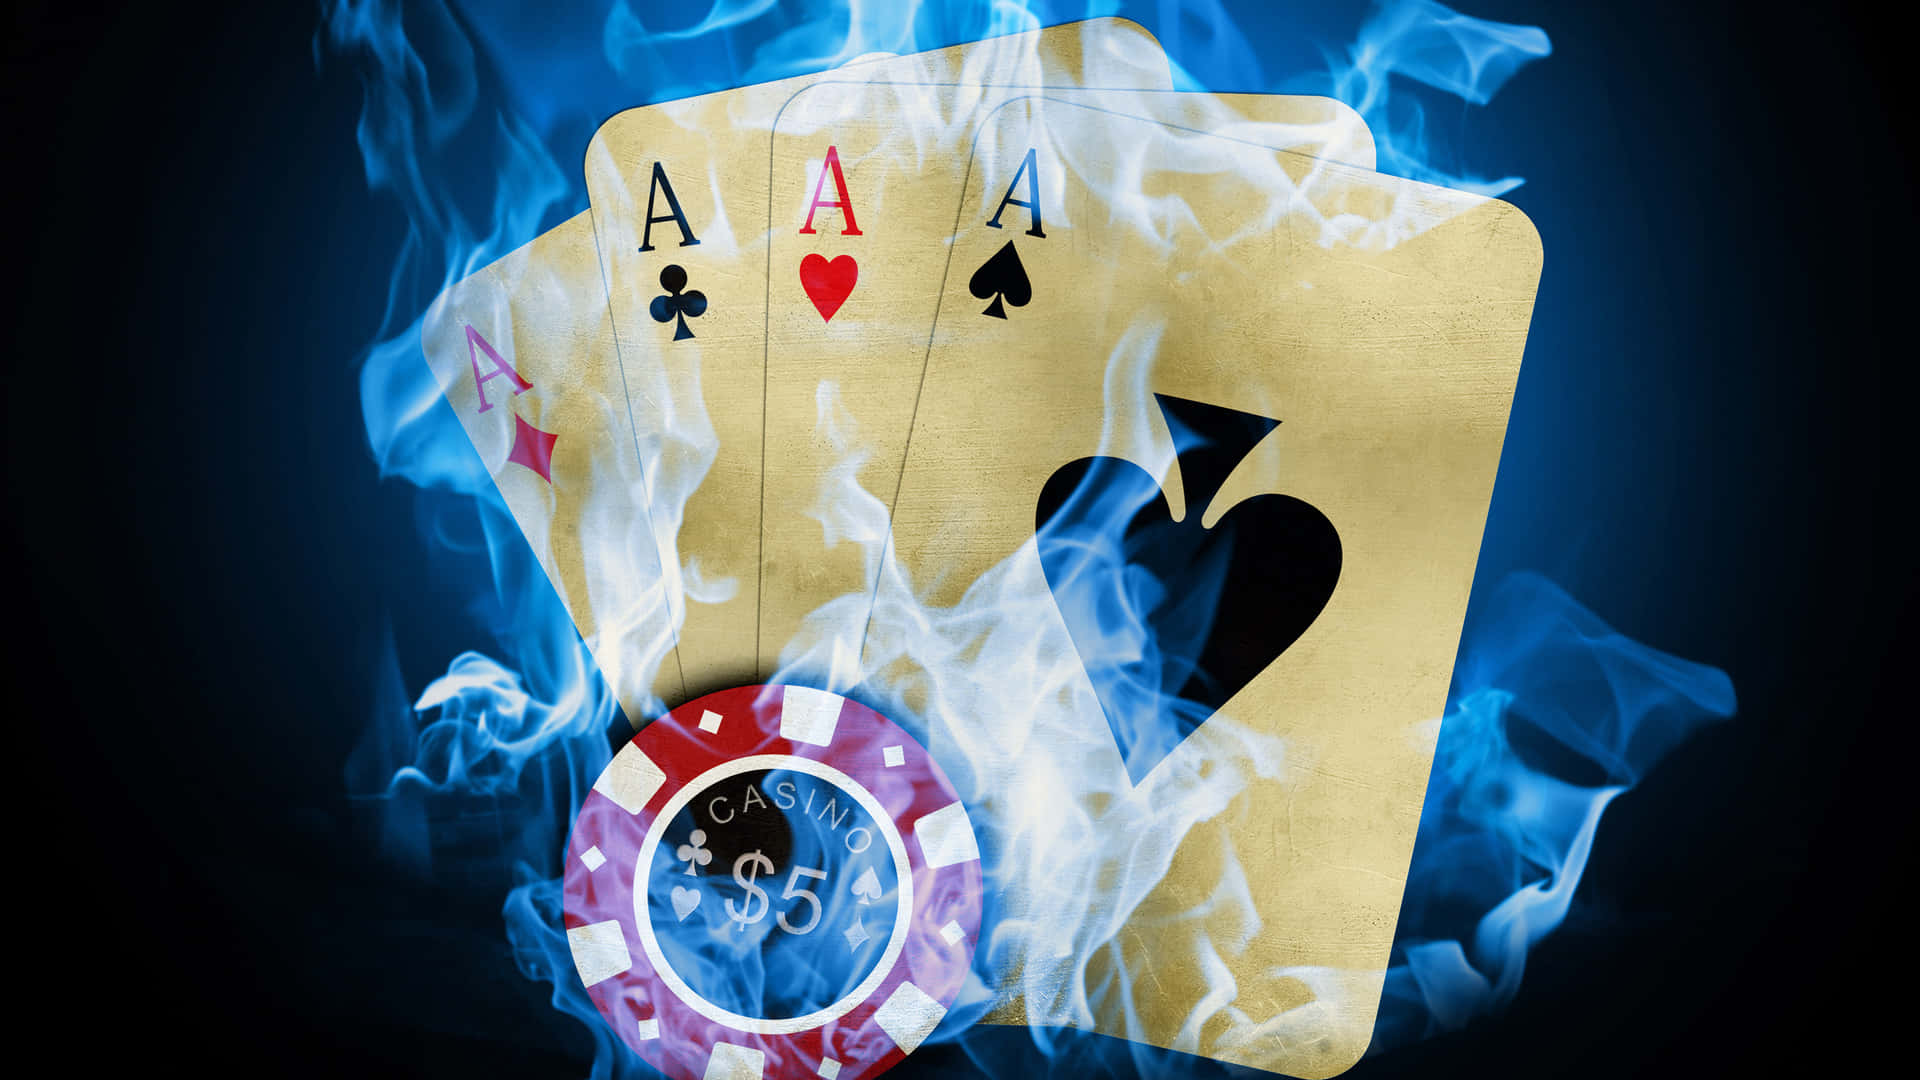 Cards In Blue Flame Casino Background